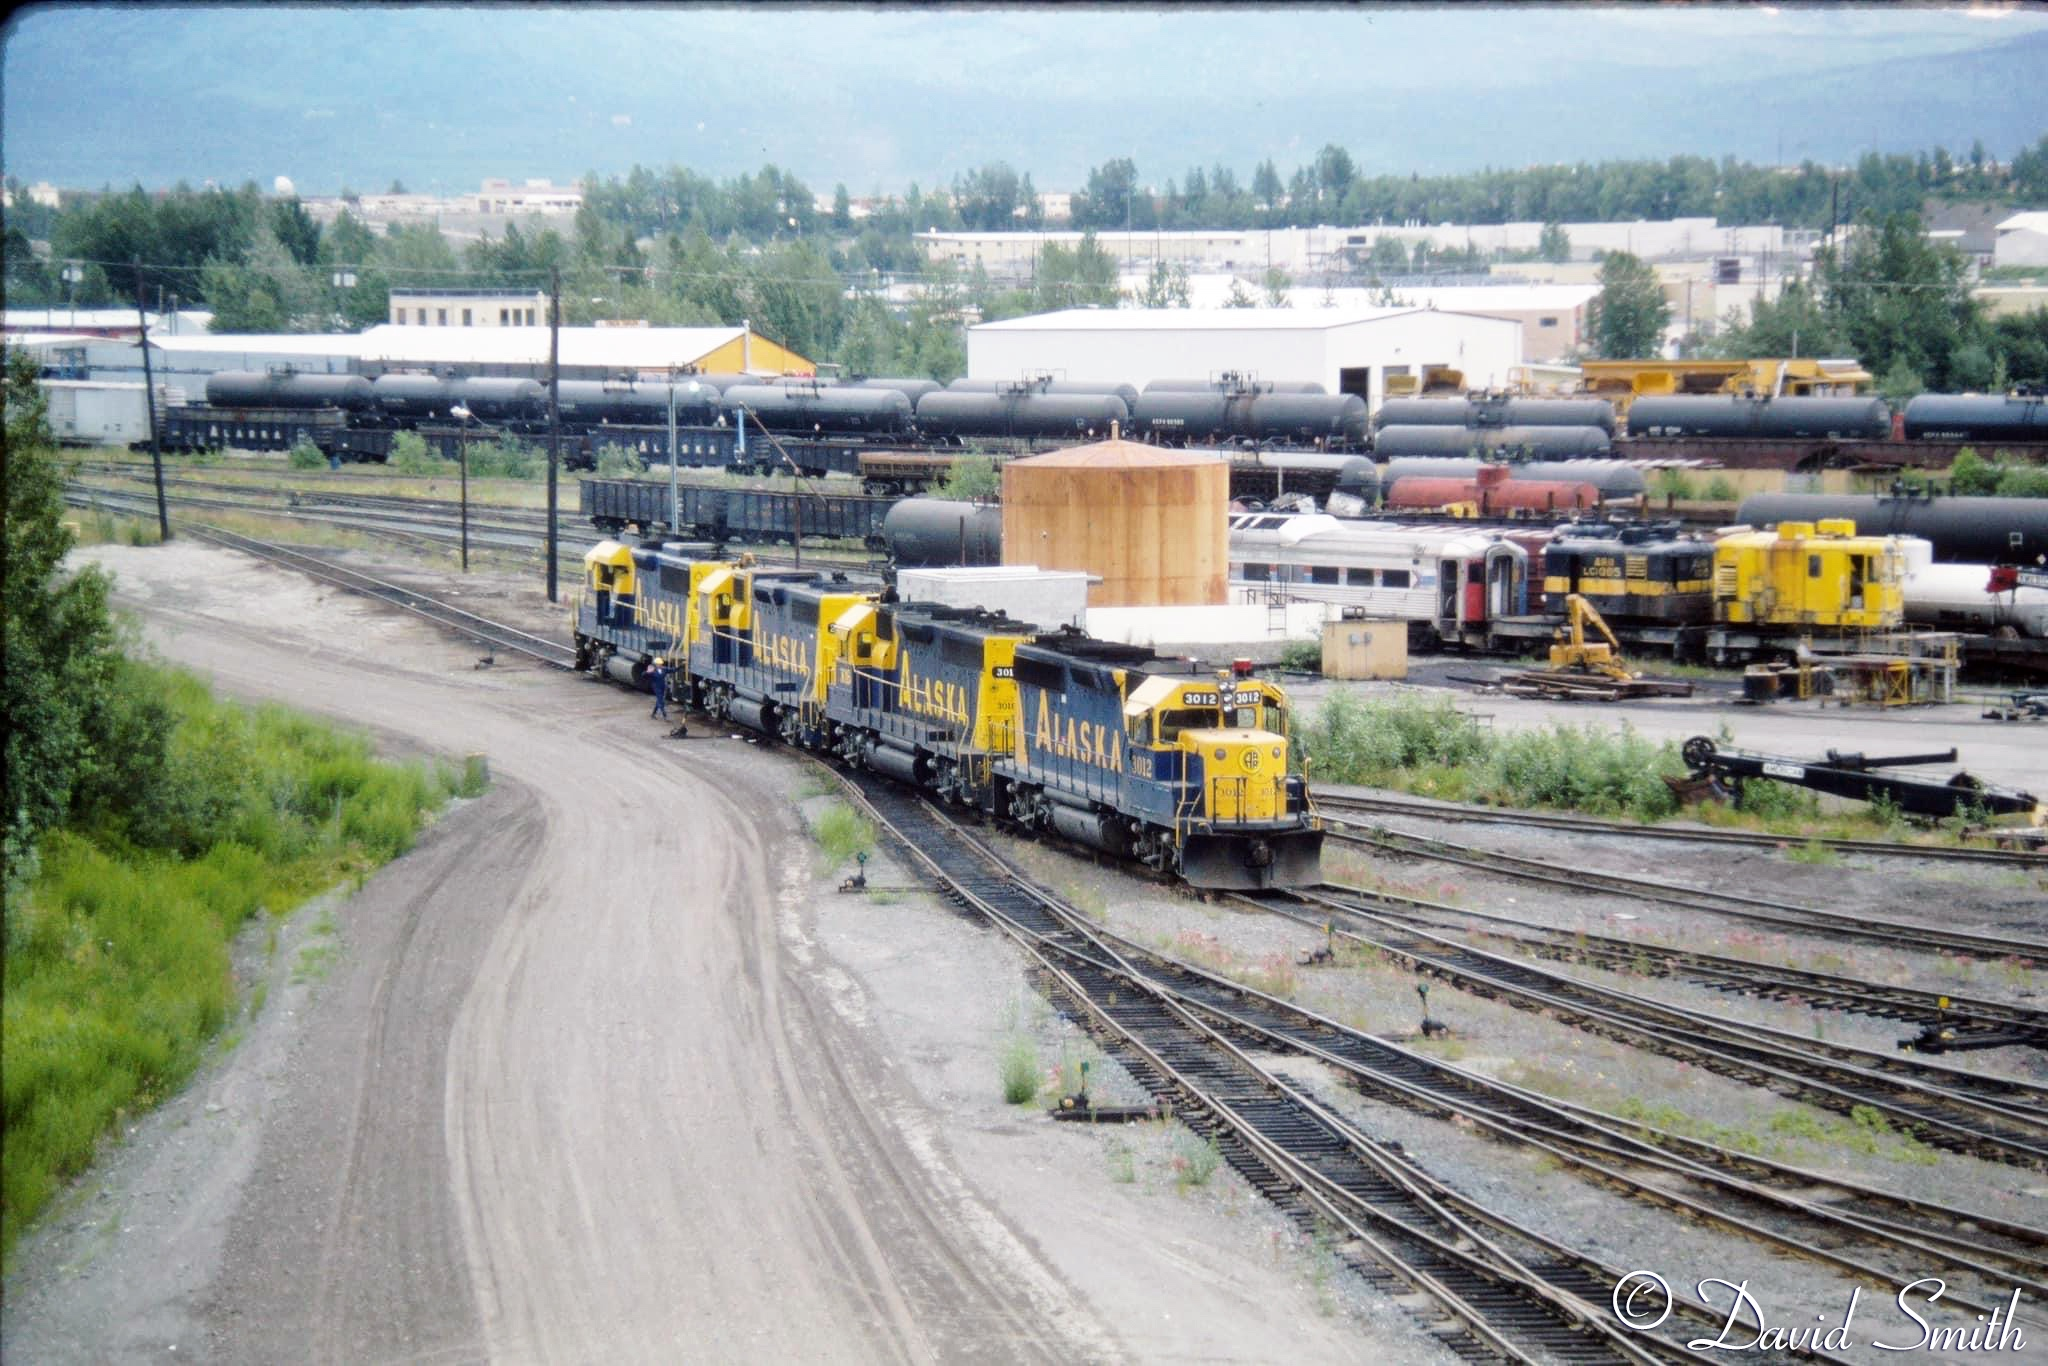 A view at the east end of the Anchorage shop. Power is GP40-2 3012, GP40u 3016, GP38 2007 & GP49 2804, along with other equipment.